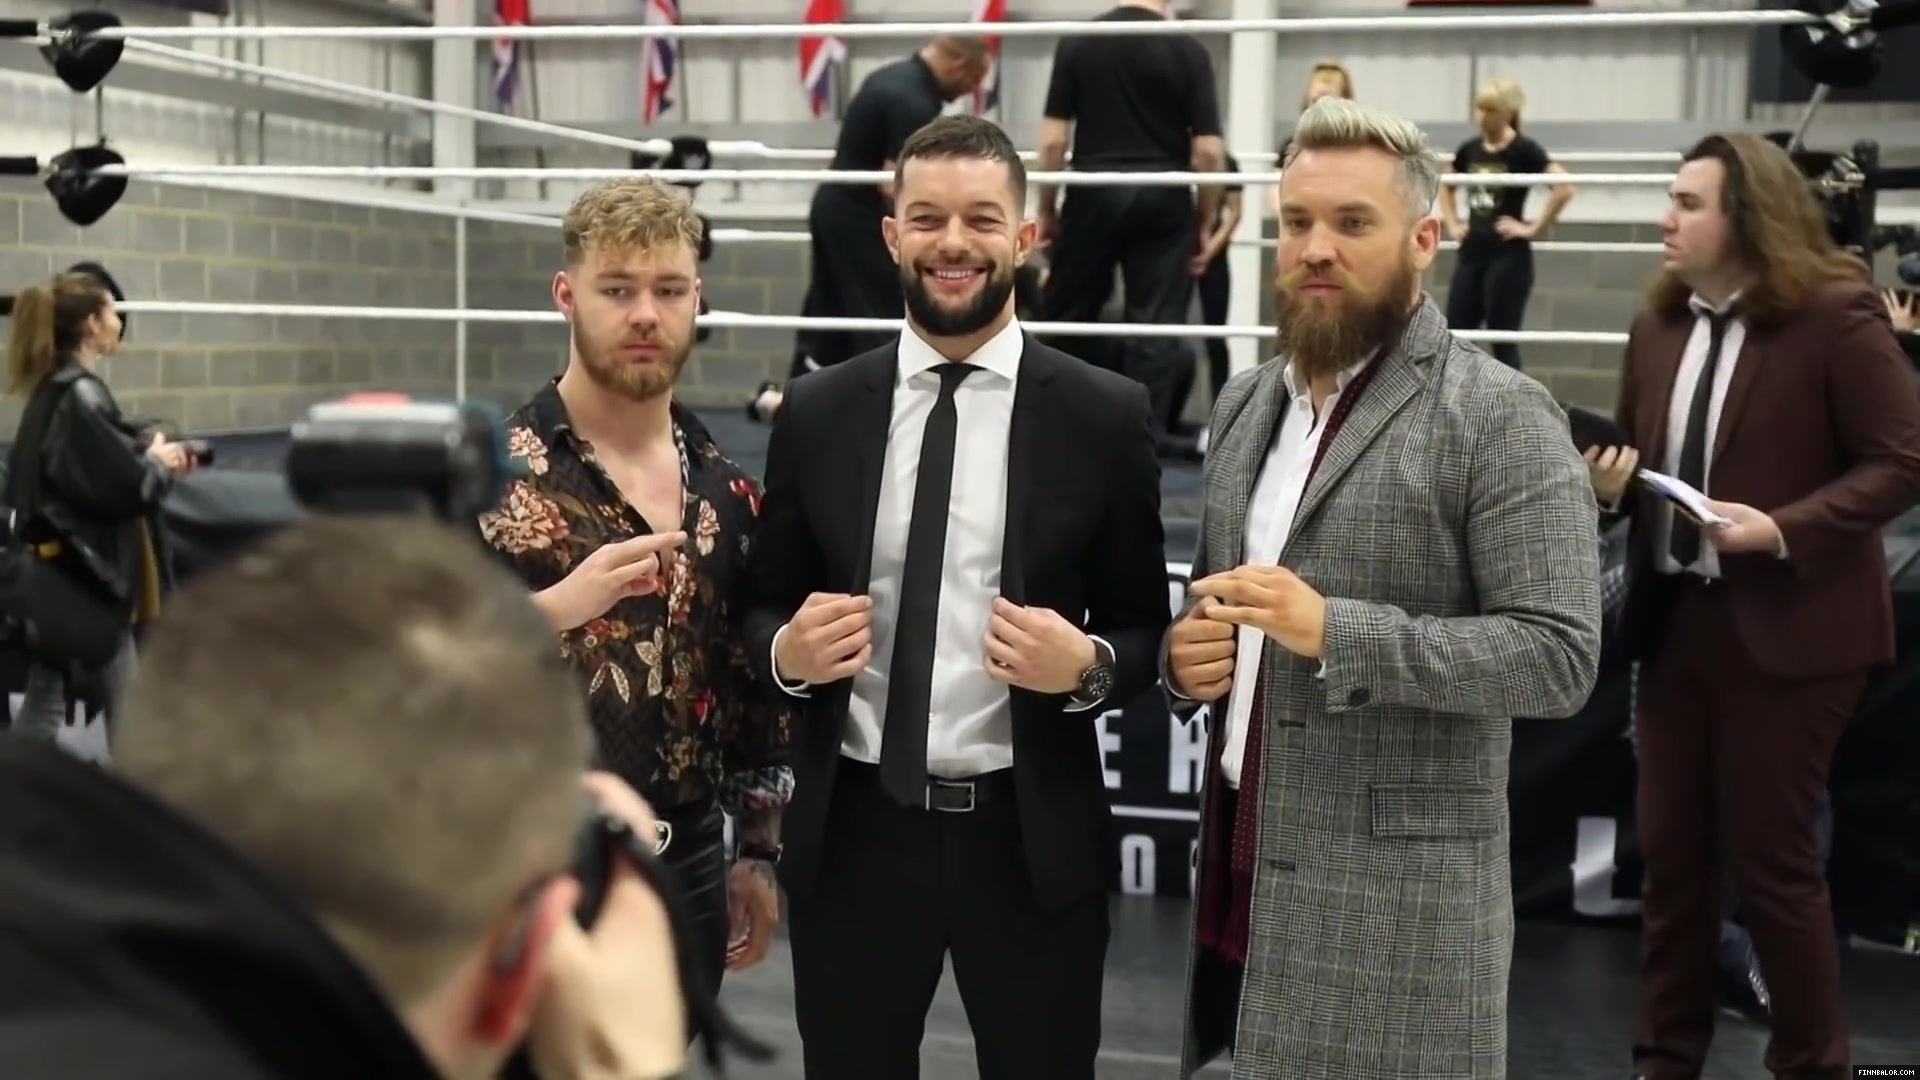 WWE_Superstar_FINN_BALOR_joins_MOUSTACHE_MOUNTAIN_at_the_opening_of_the_NXT_UK_PC_041.jpg